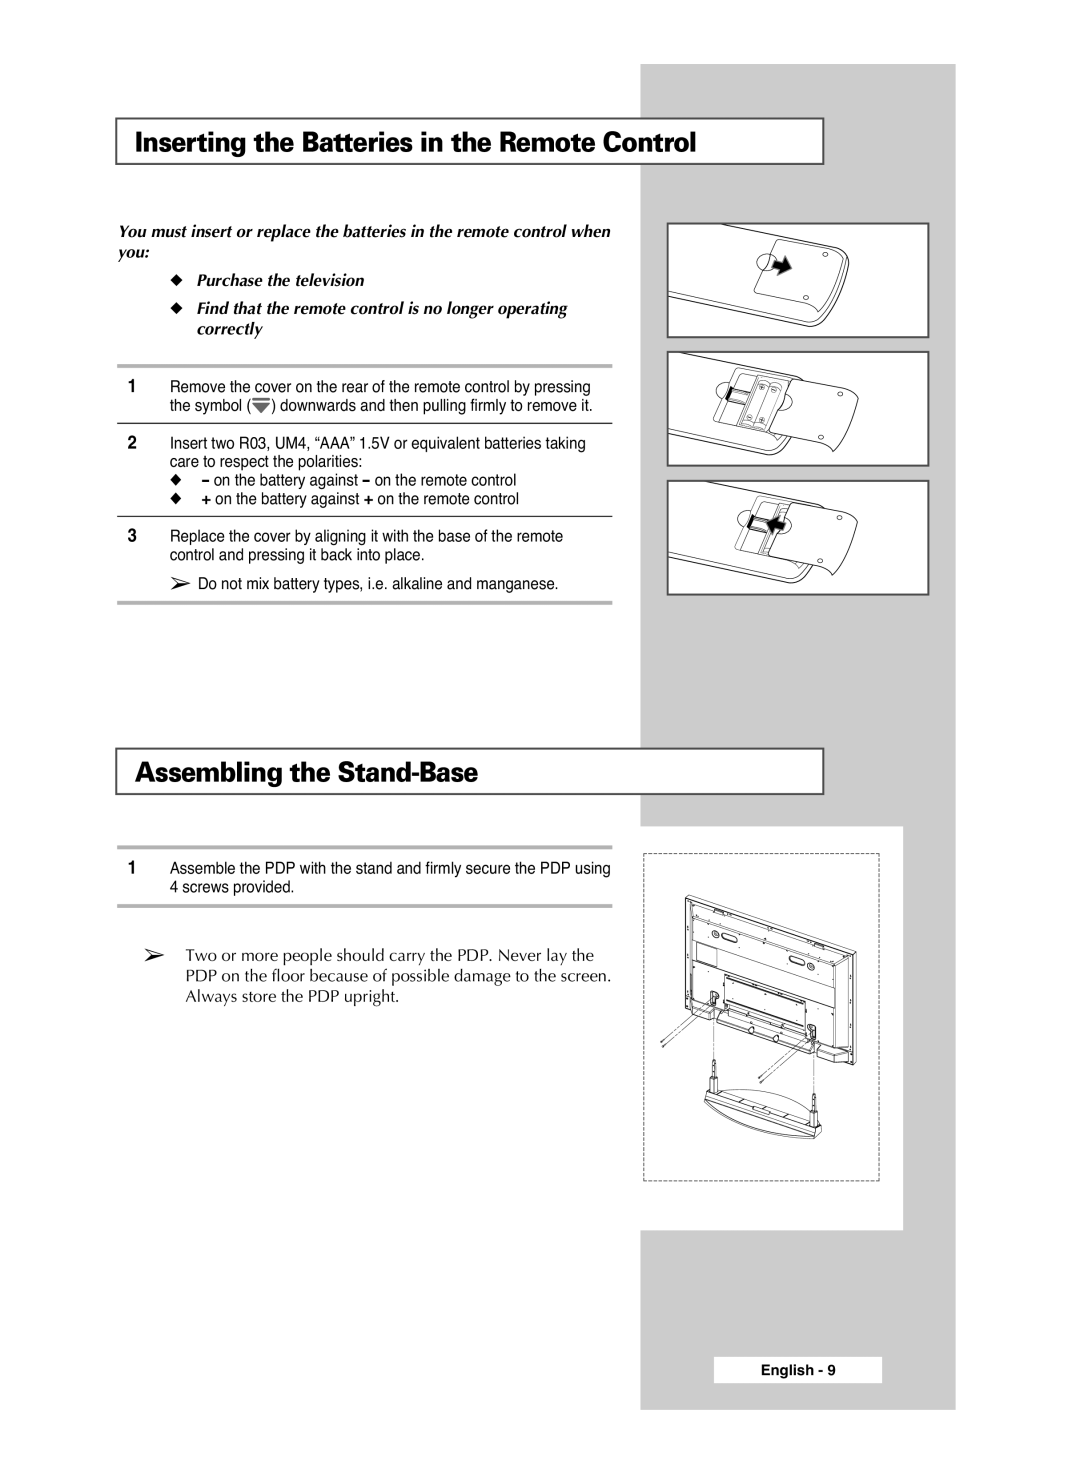 Samsung PS-42S5S manual Inserting the Batteries in the Remote Control, Assembling the Stand-Base, Purchase the television 